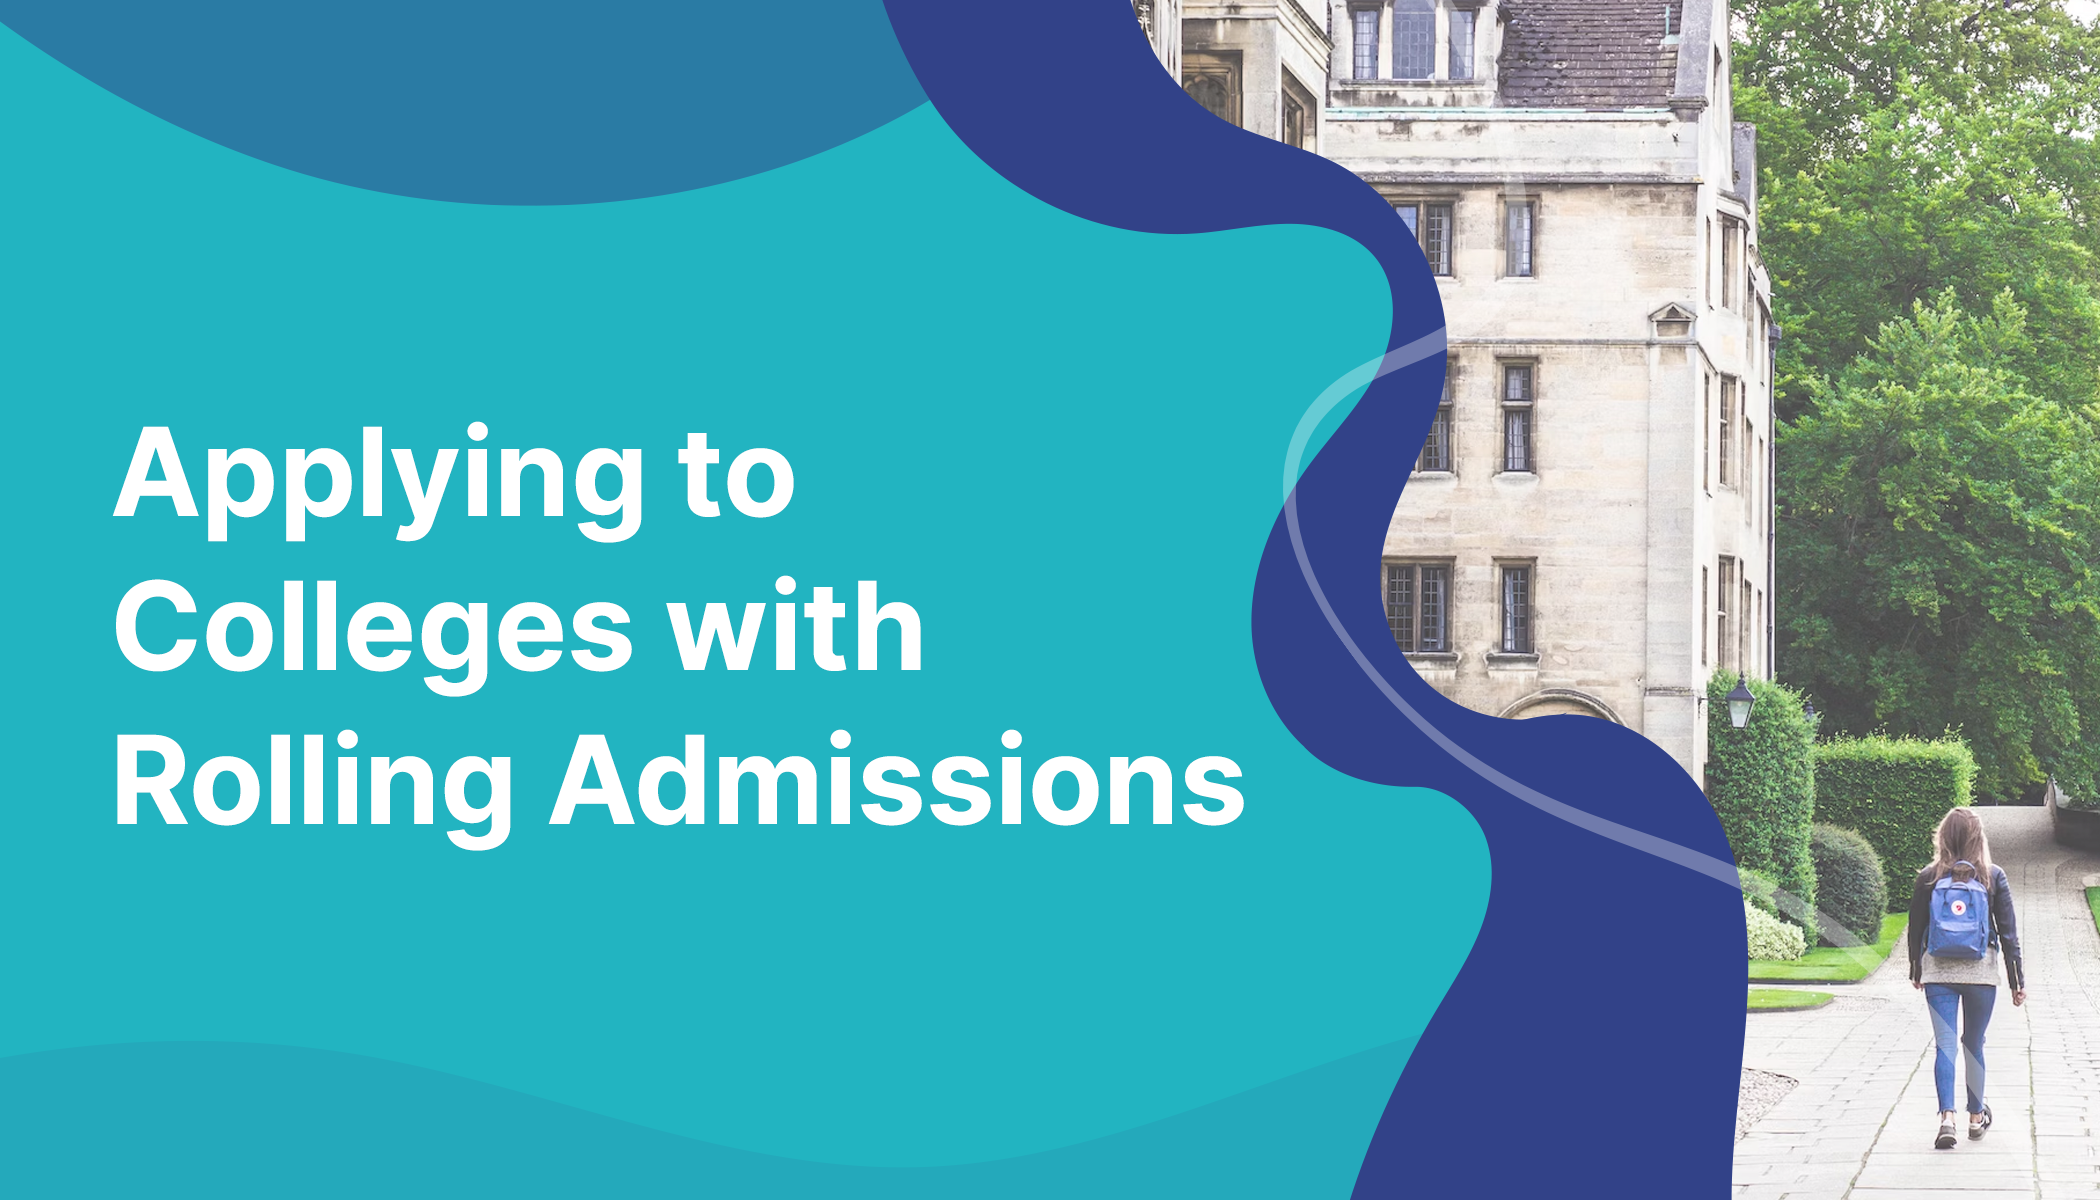 Colleges with Rolling Admissions What is Rolling Admission?